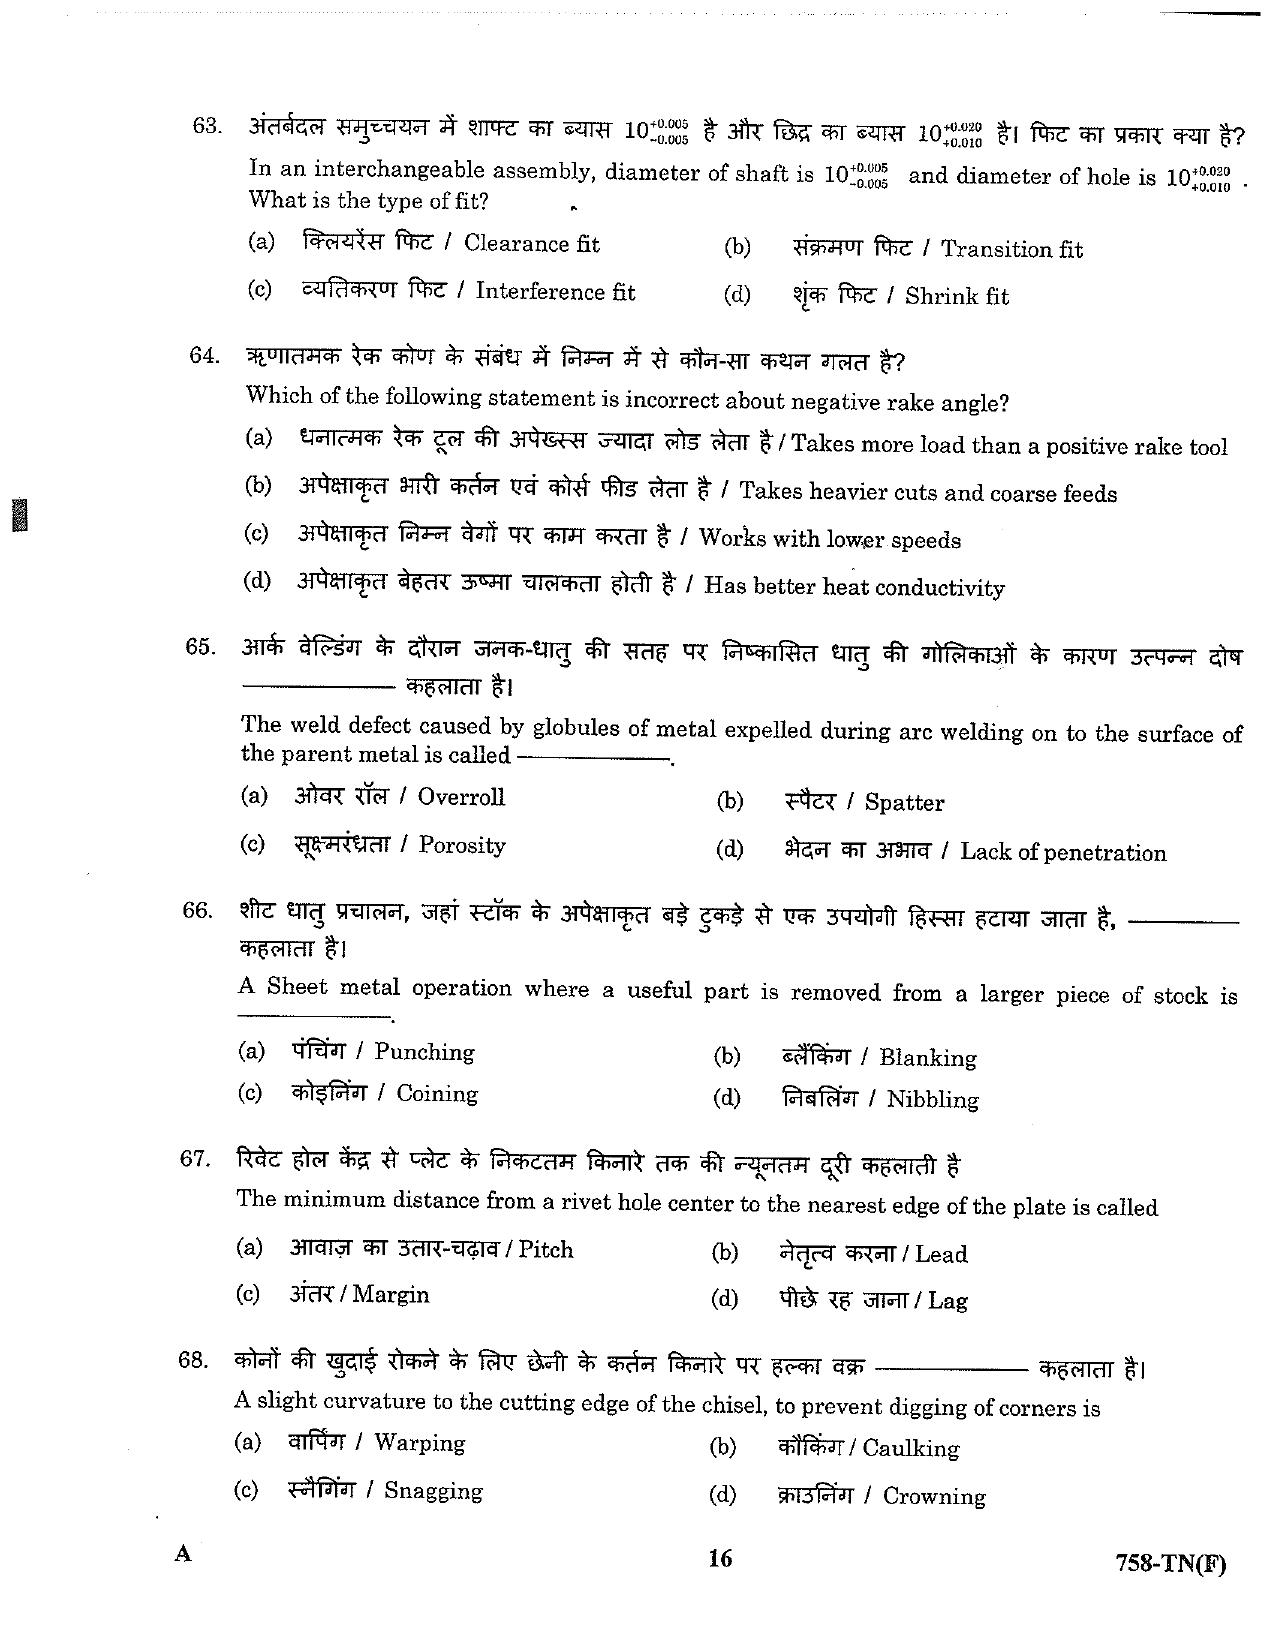 LPSC Technician ‘B’ (Fitter) 2023 Question Paper - Page 16